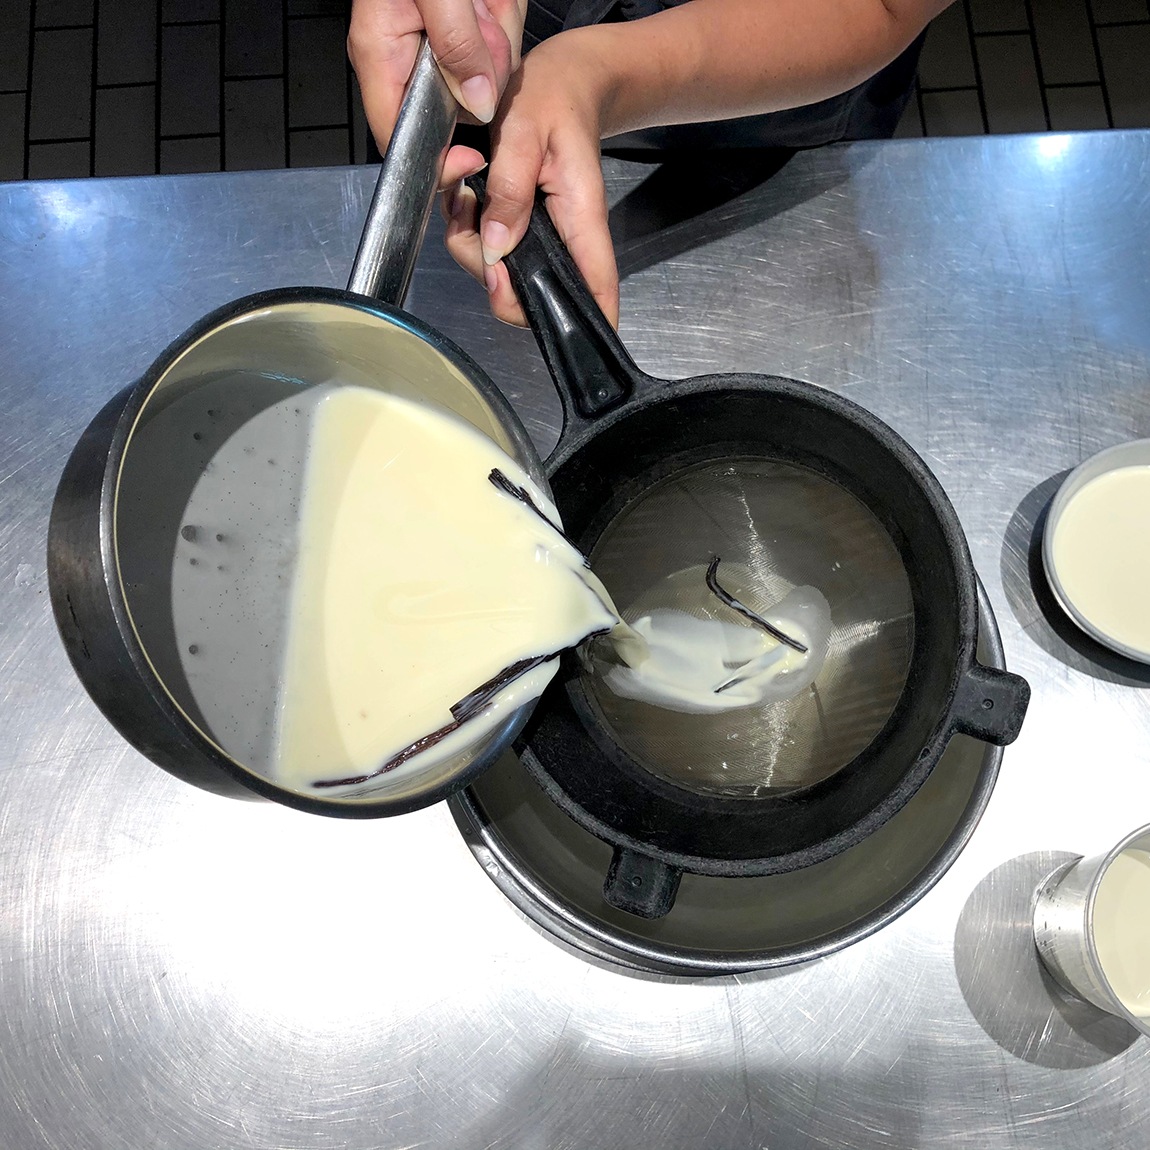 Summer Wright pours vanilla pudding into a strainer above a mixing bowl on a metal counter.